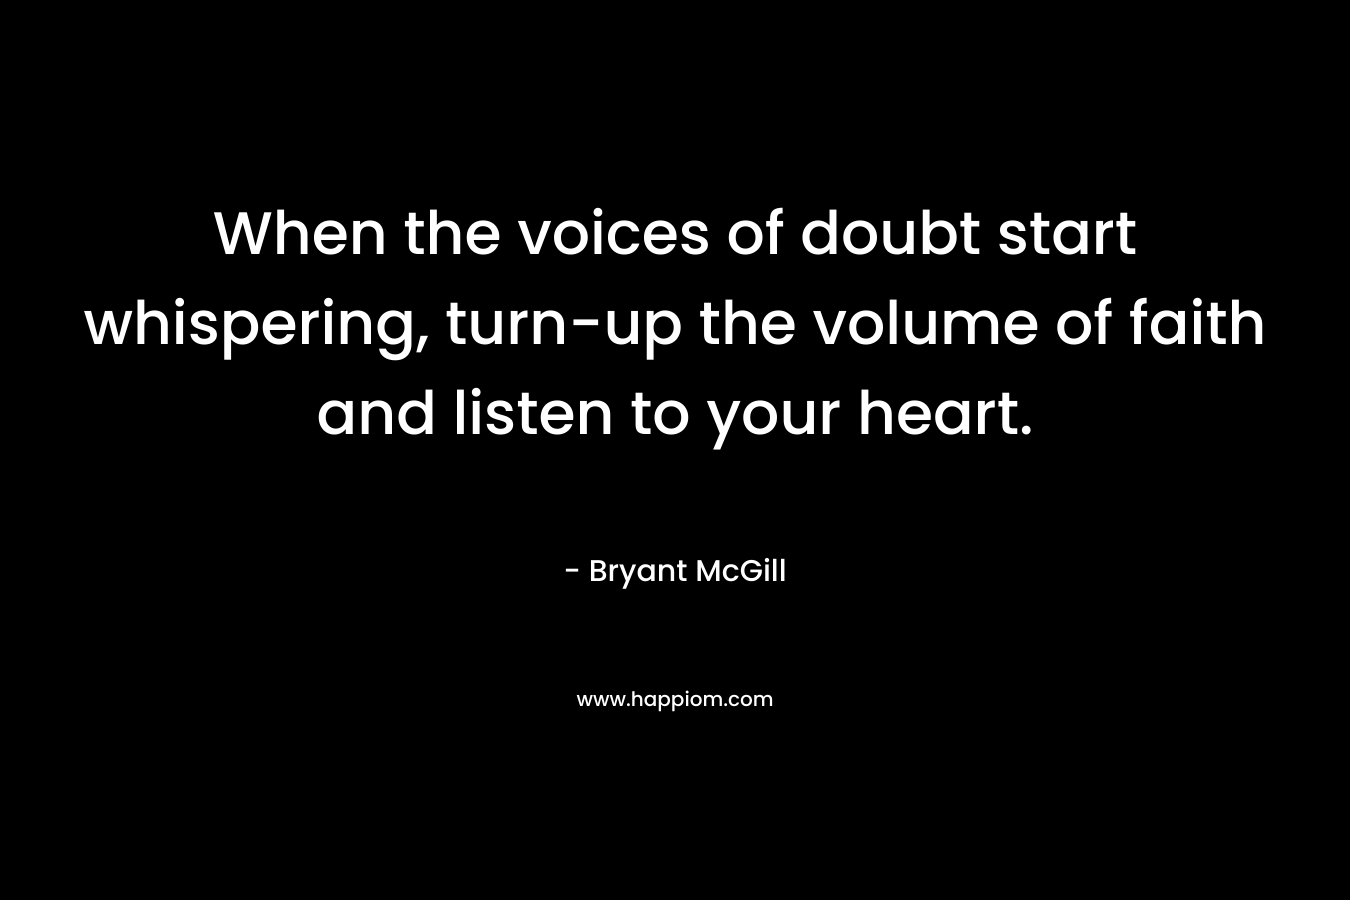 When the voices of doubt start whispering, turn-up the volume of faith and listen to your heart. – Bryant McGill